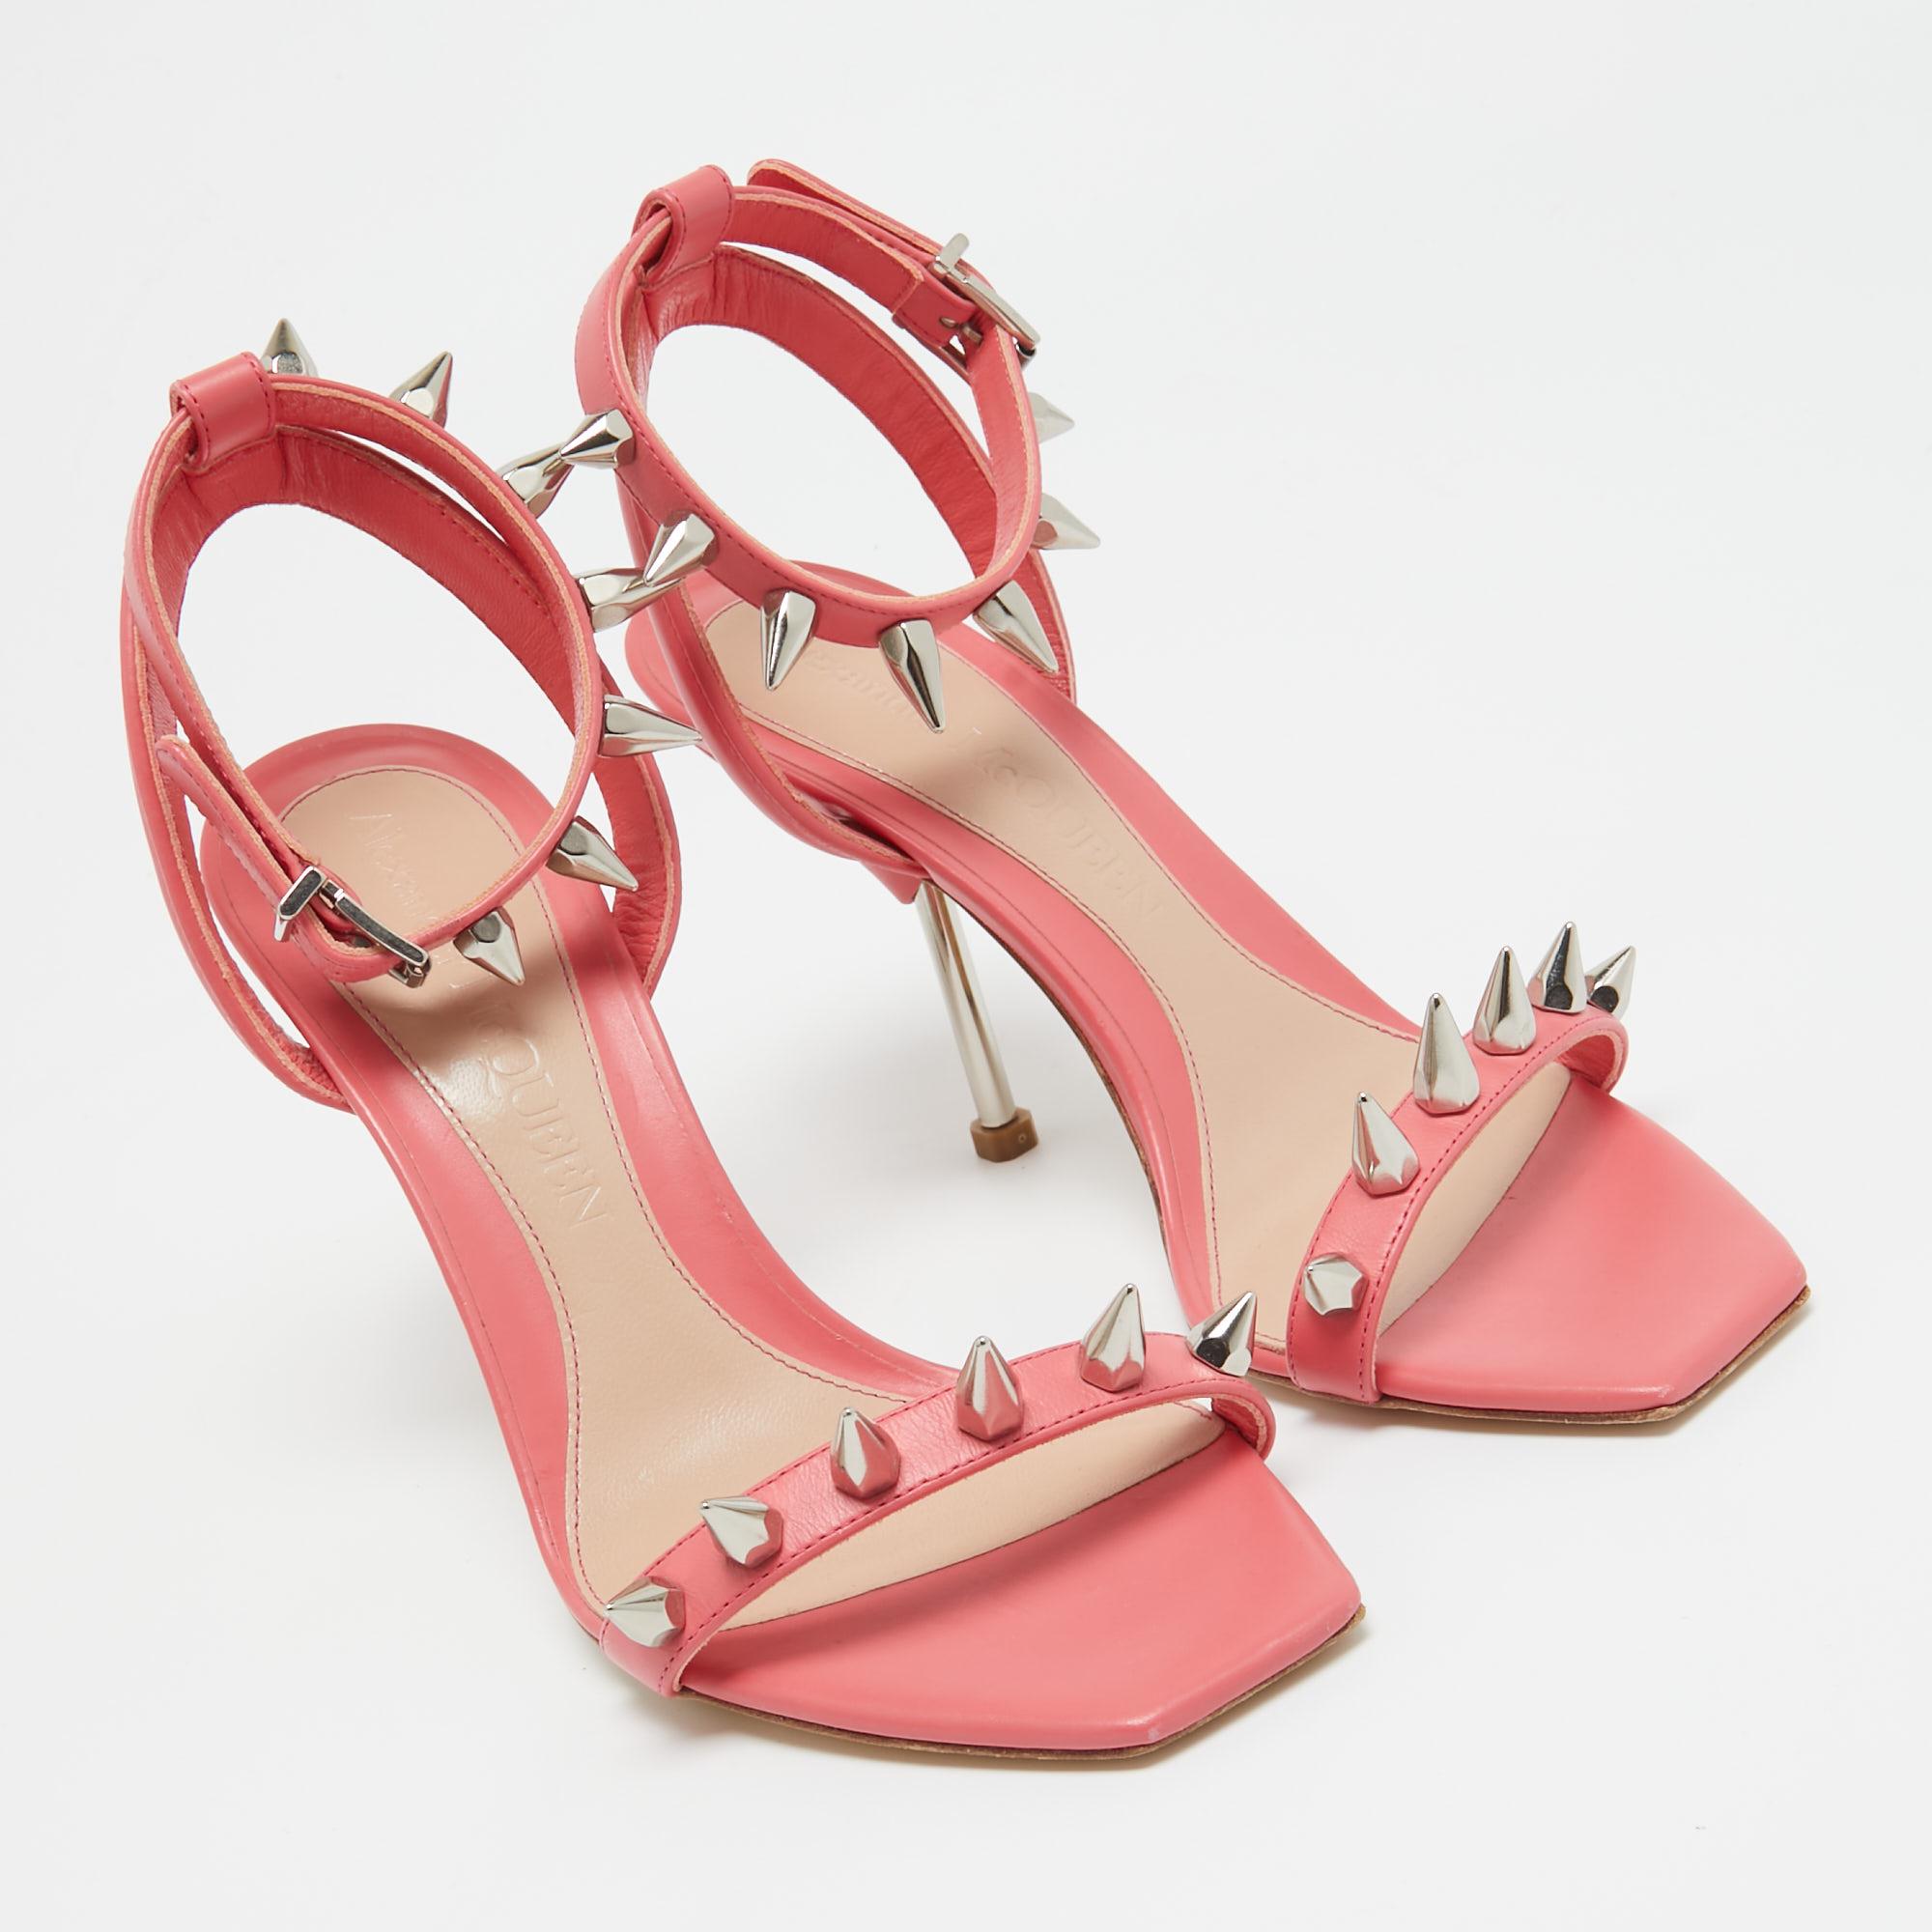 Alexander McQueen Pink Leather Spike Ankle Strap Sandals Size 36.5 In Excellent Condition For Sale In Dubai, Al Qouz 2